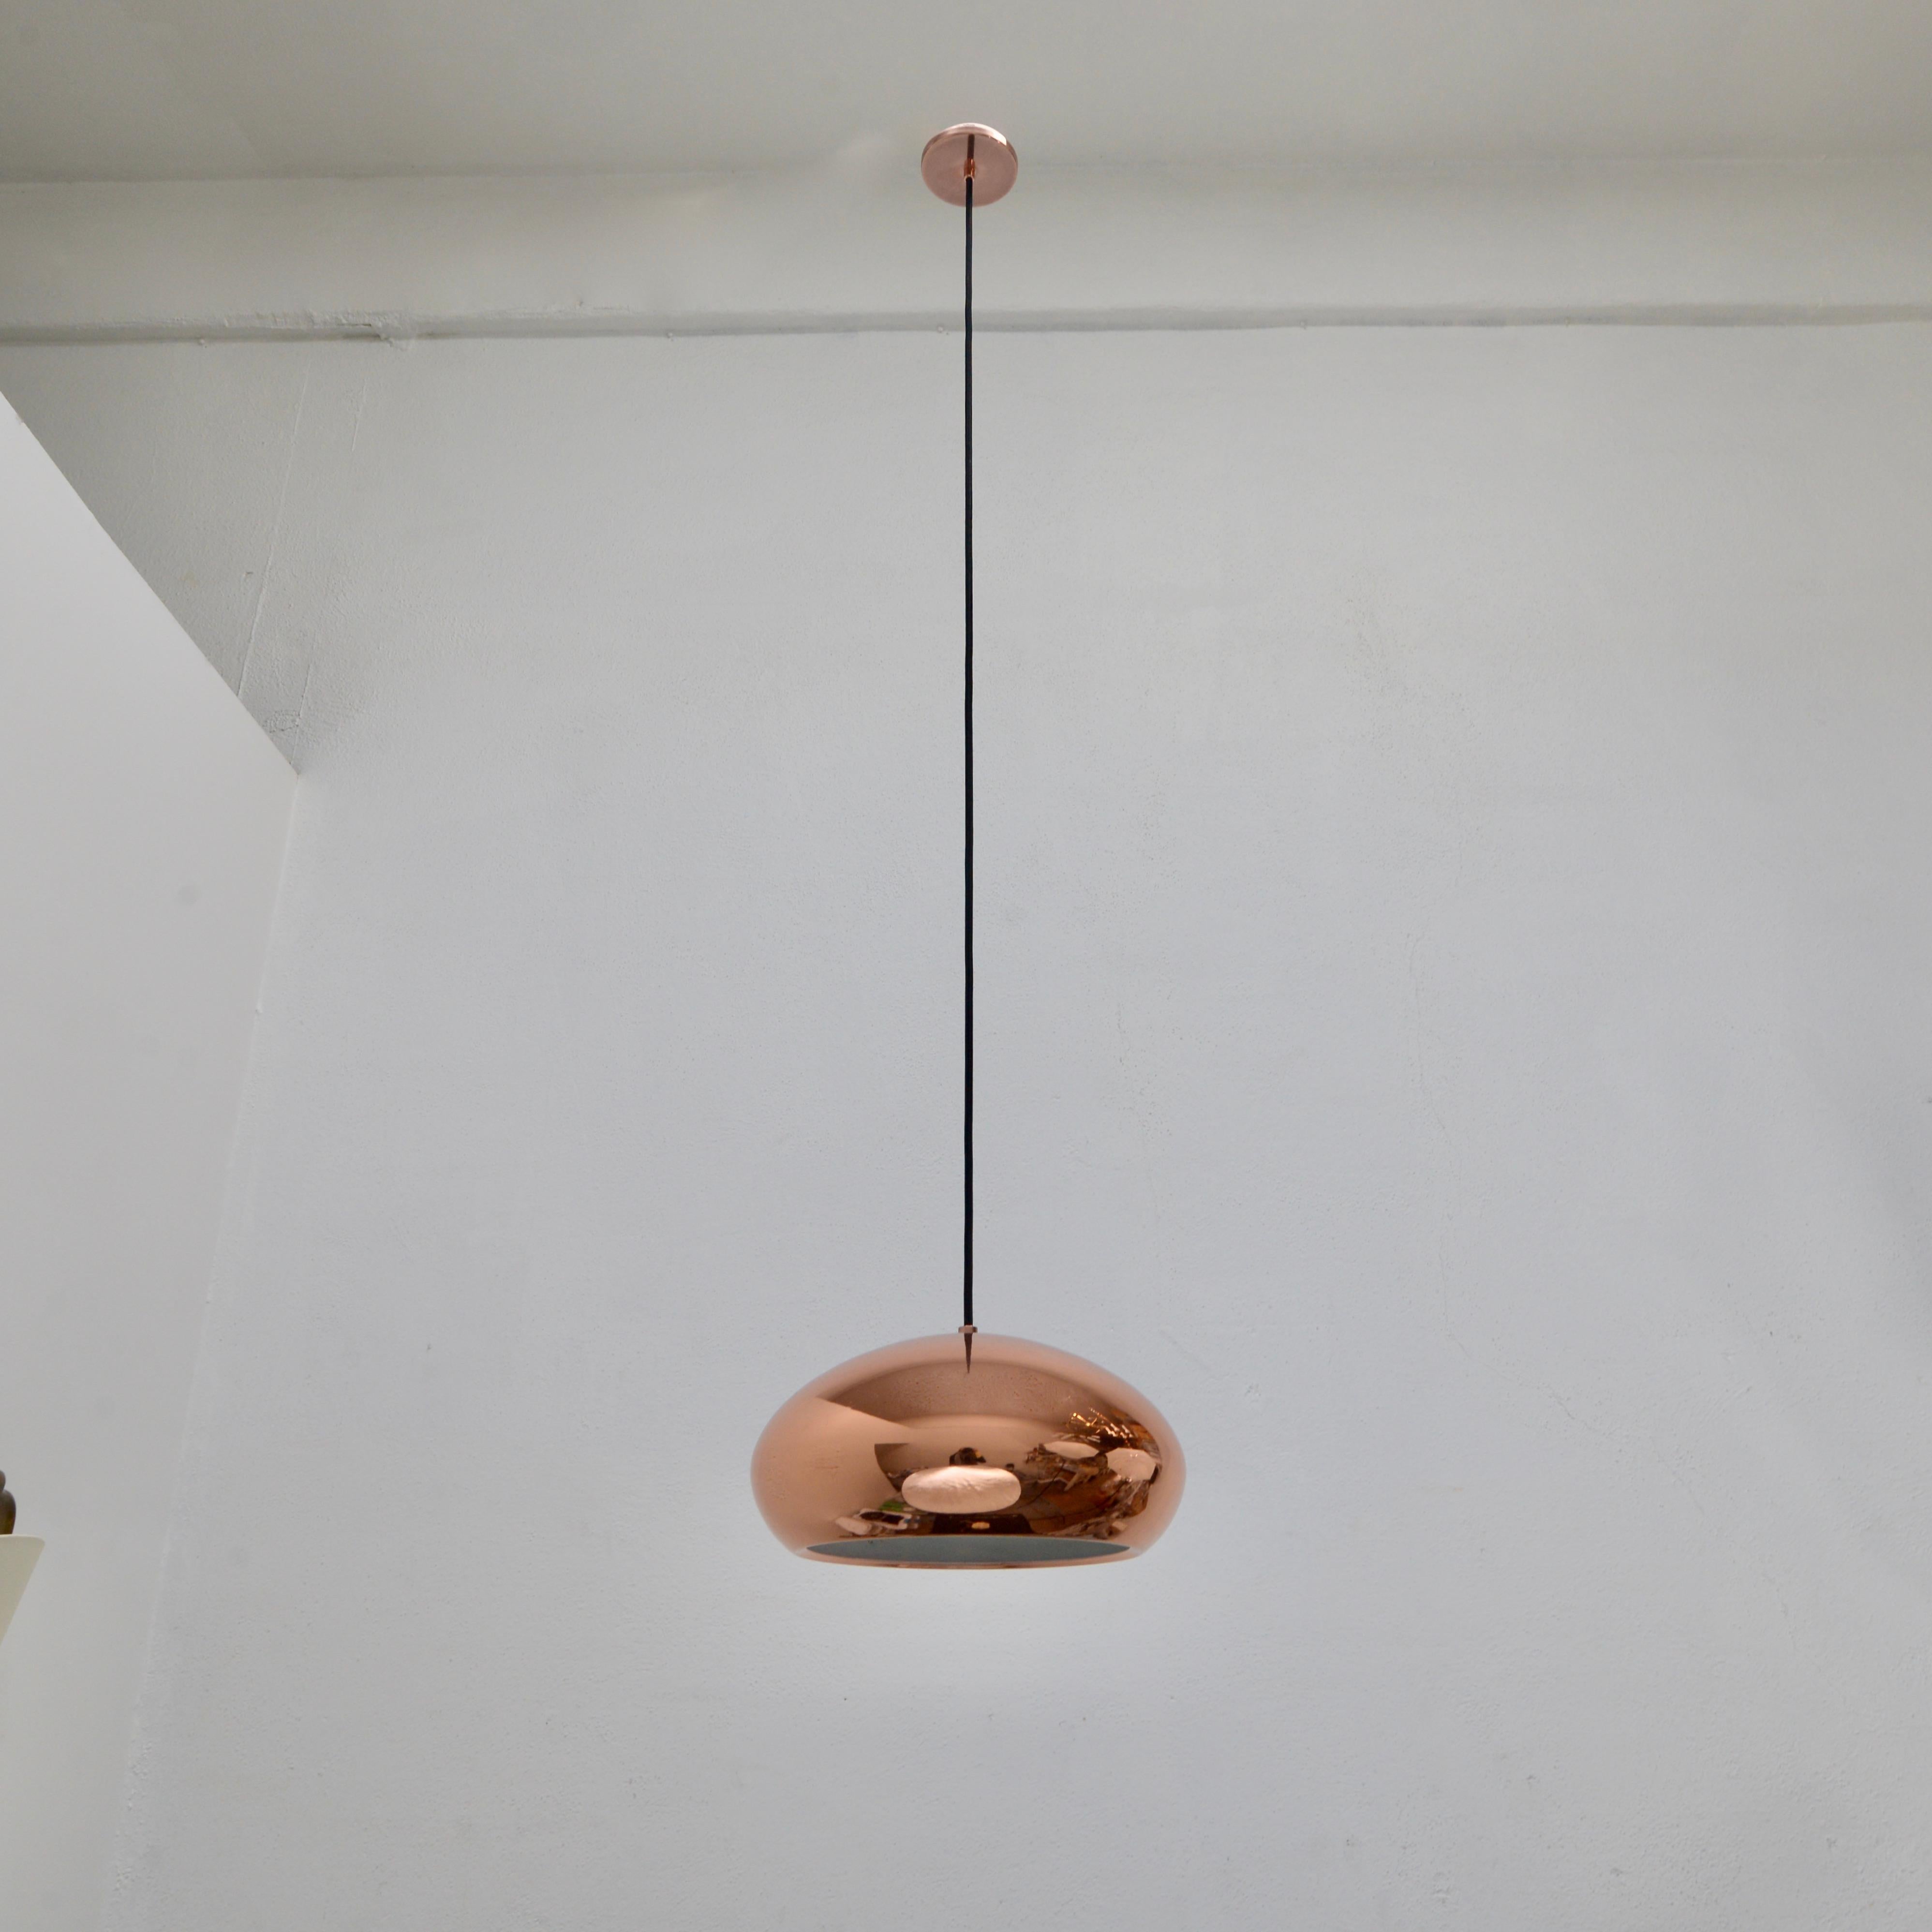 A beautiful 1960s original finish copper pendant from Italy, lightly patinated. With 1-E26 medium based socket, wired for use in the US. Light bulb included with order.
Measurements:
OAD: 56” can be adjusted
Diameter 12.5”
Fixture height 7”.